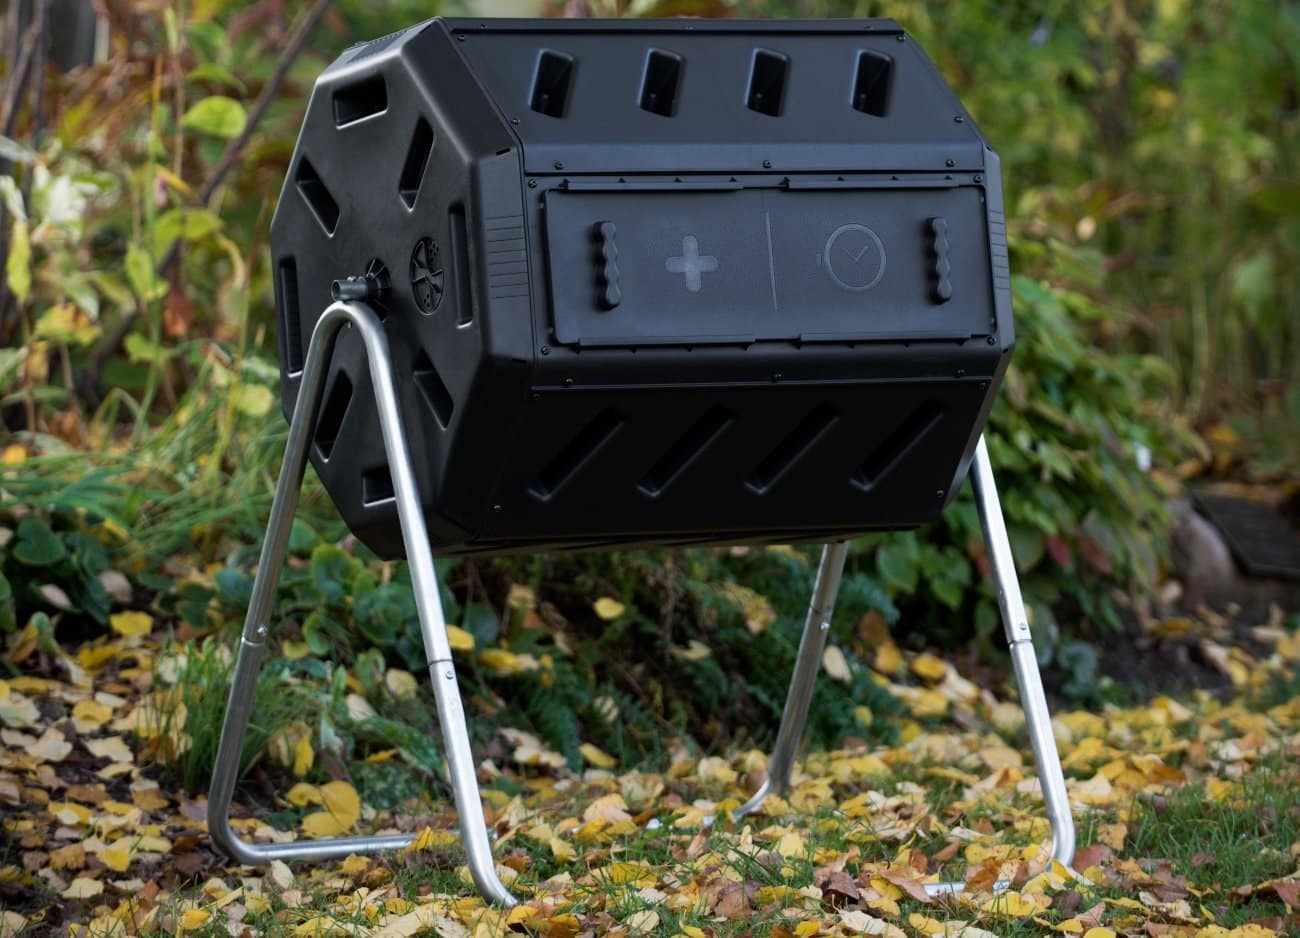 A black plastic compost tumbler sits amongst a wooded area. The tumbler contains two compartments so you can feed on side while letting the other side break down further. 